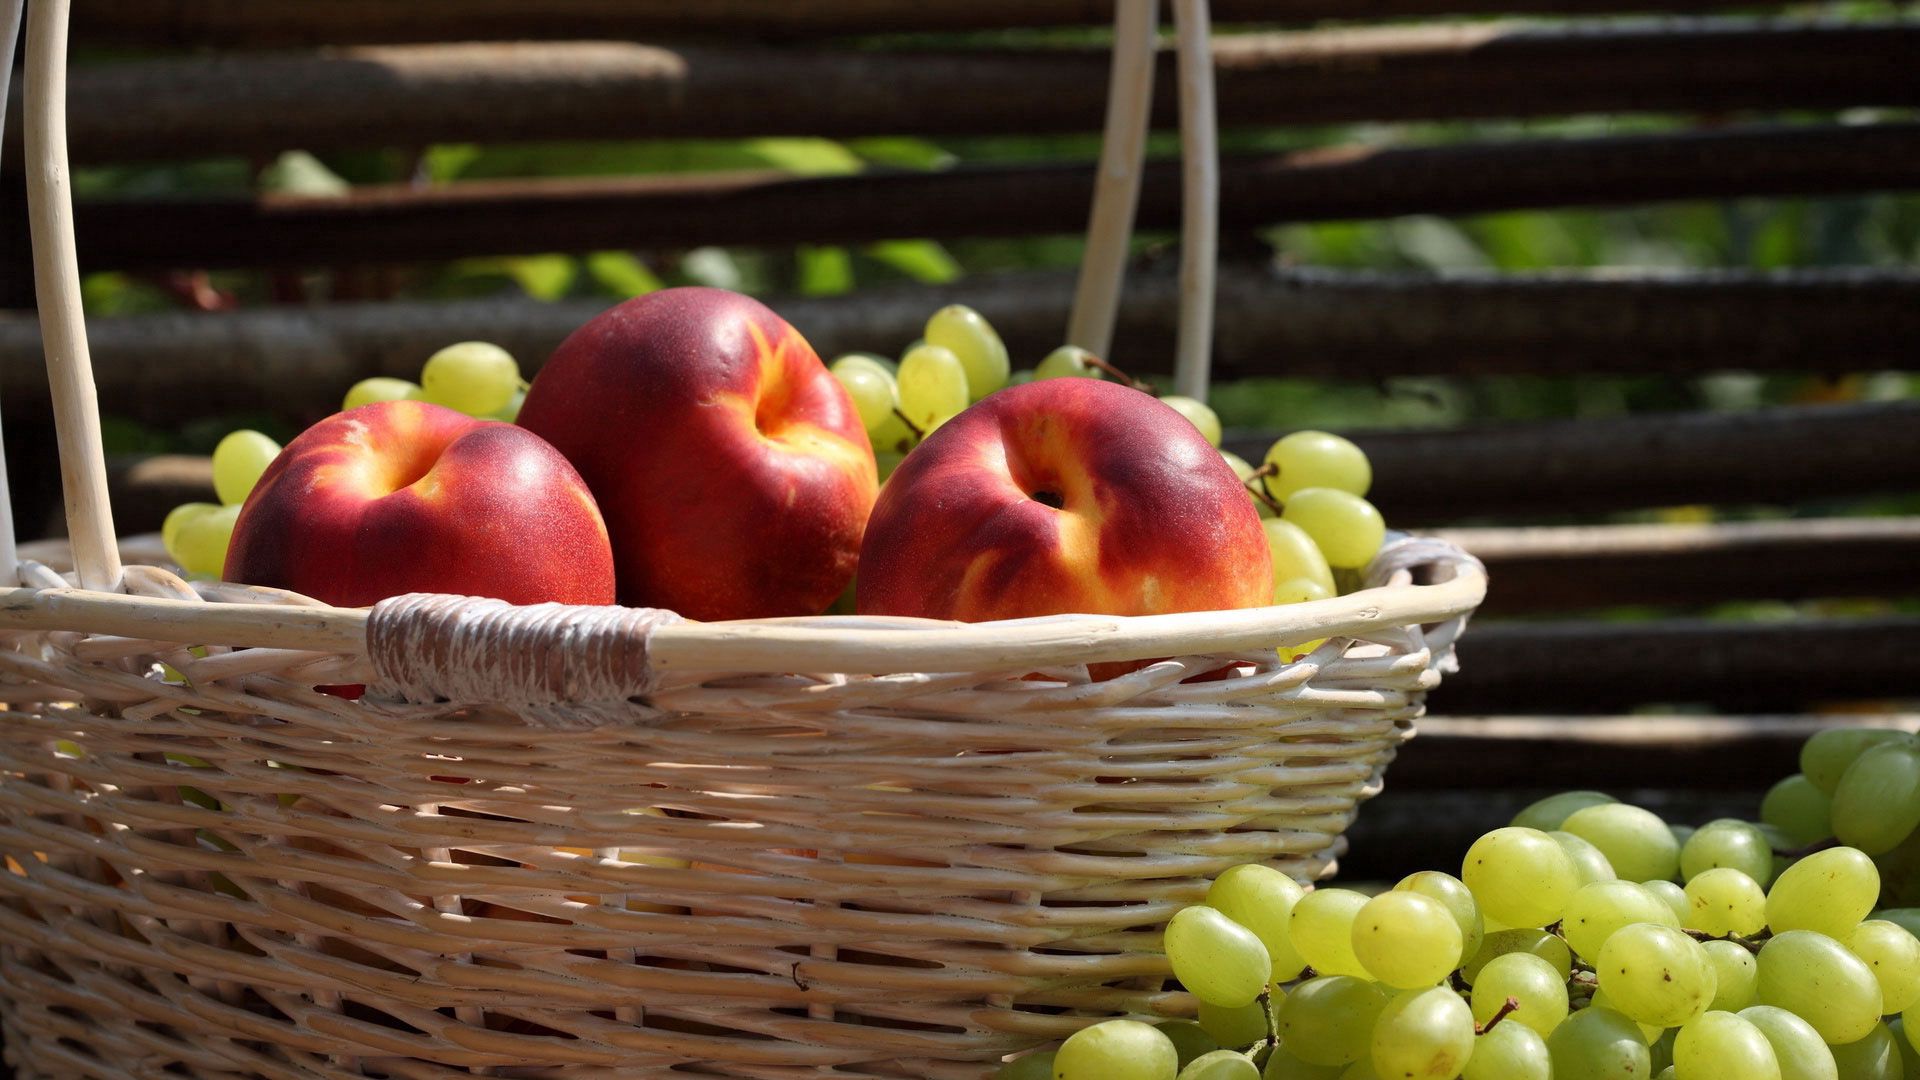 82221 download wallpaper food, grapes, peaches, basket, harvest screensavers and pictures for free